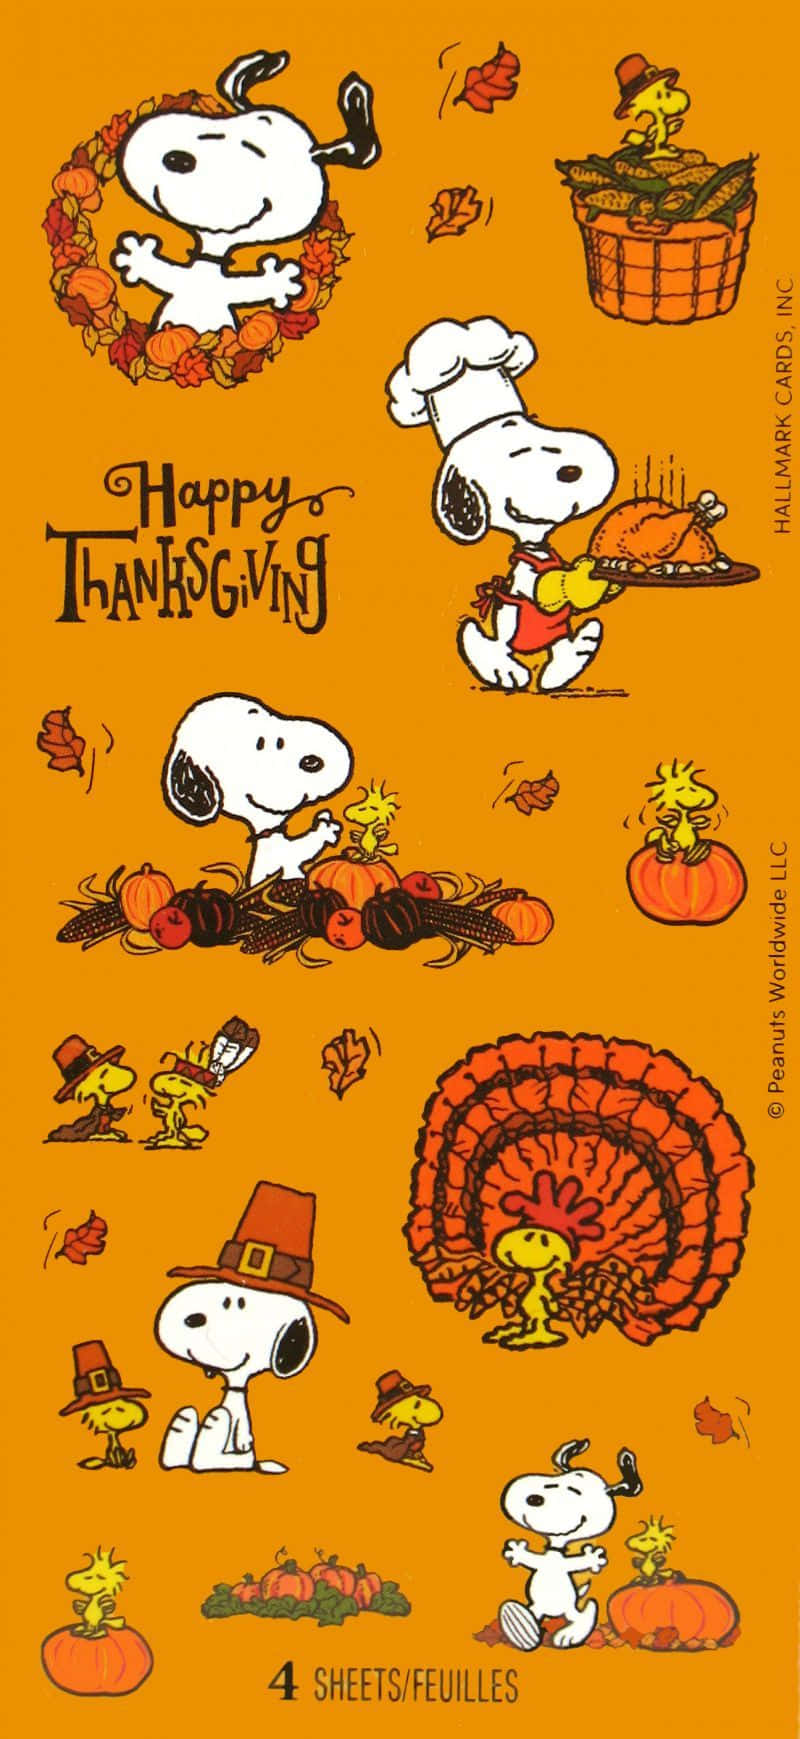 Snoopy Celebrates Thanksgiving With Family And Friends